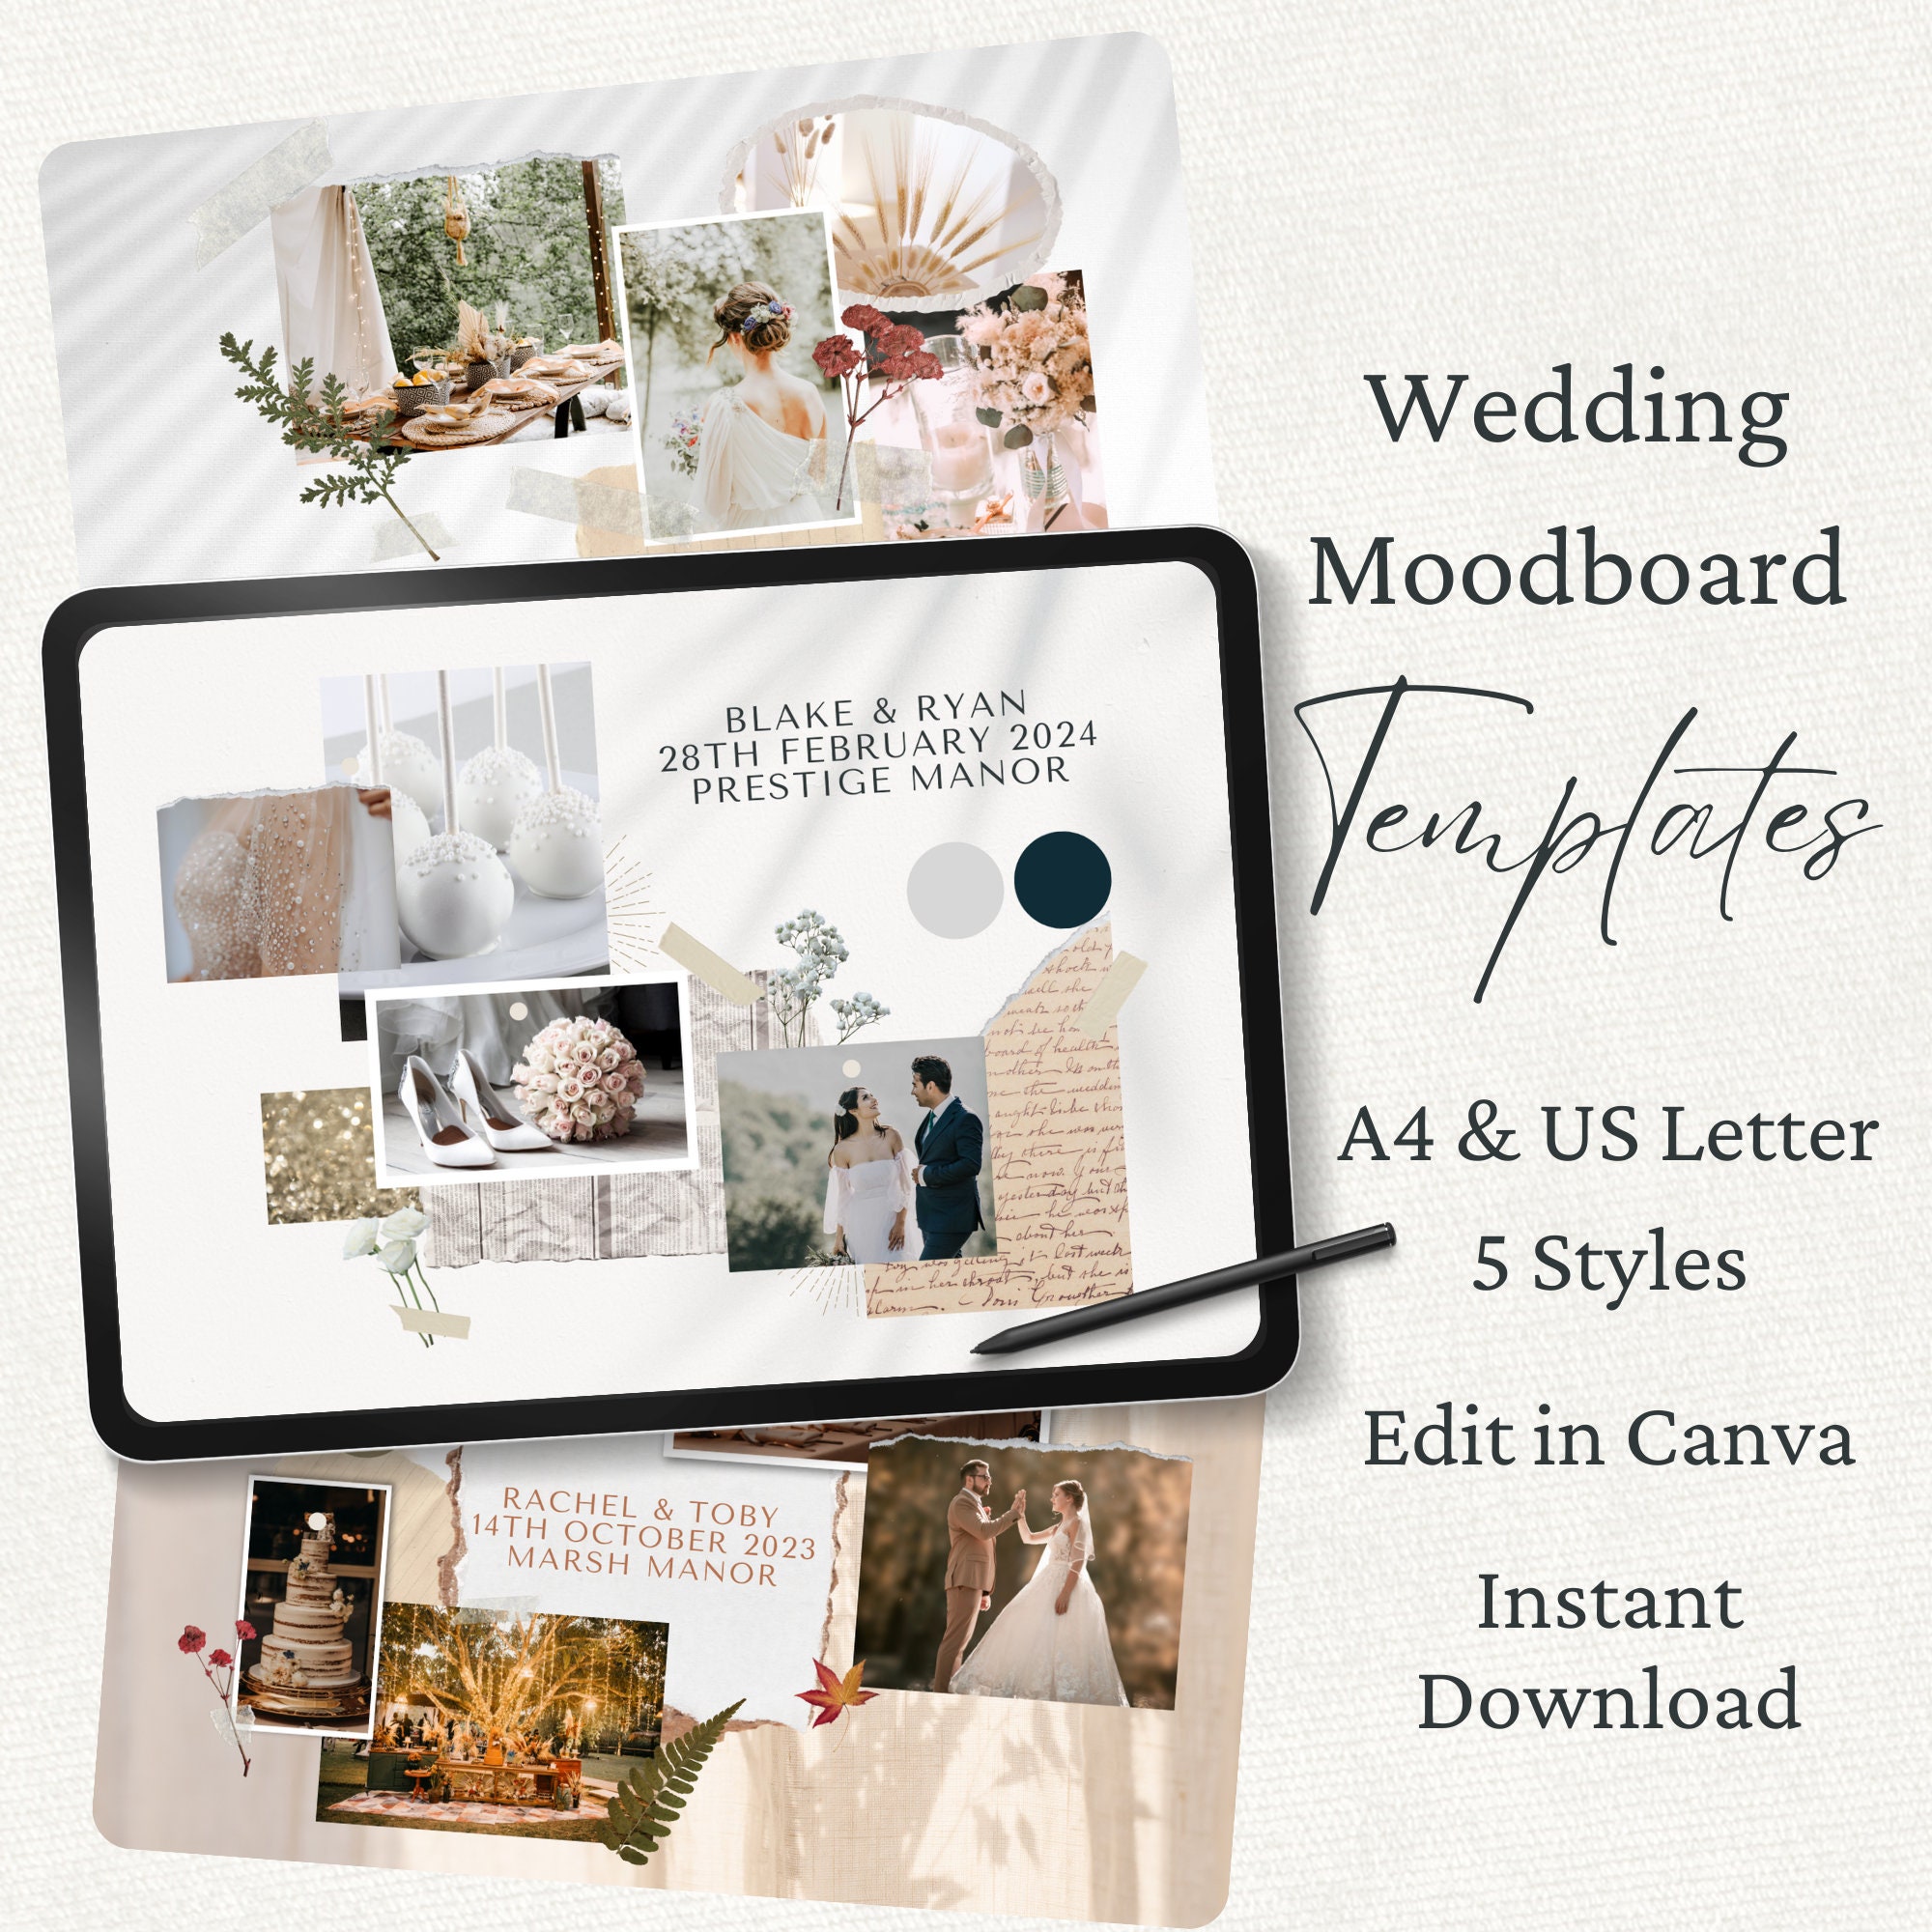 Downloadable Wedding Planner, 100 Pages Canva Editable Interior Templates  Plan Bundle Book - Planners weekly